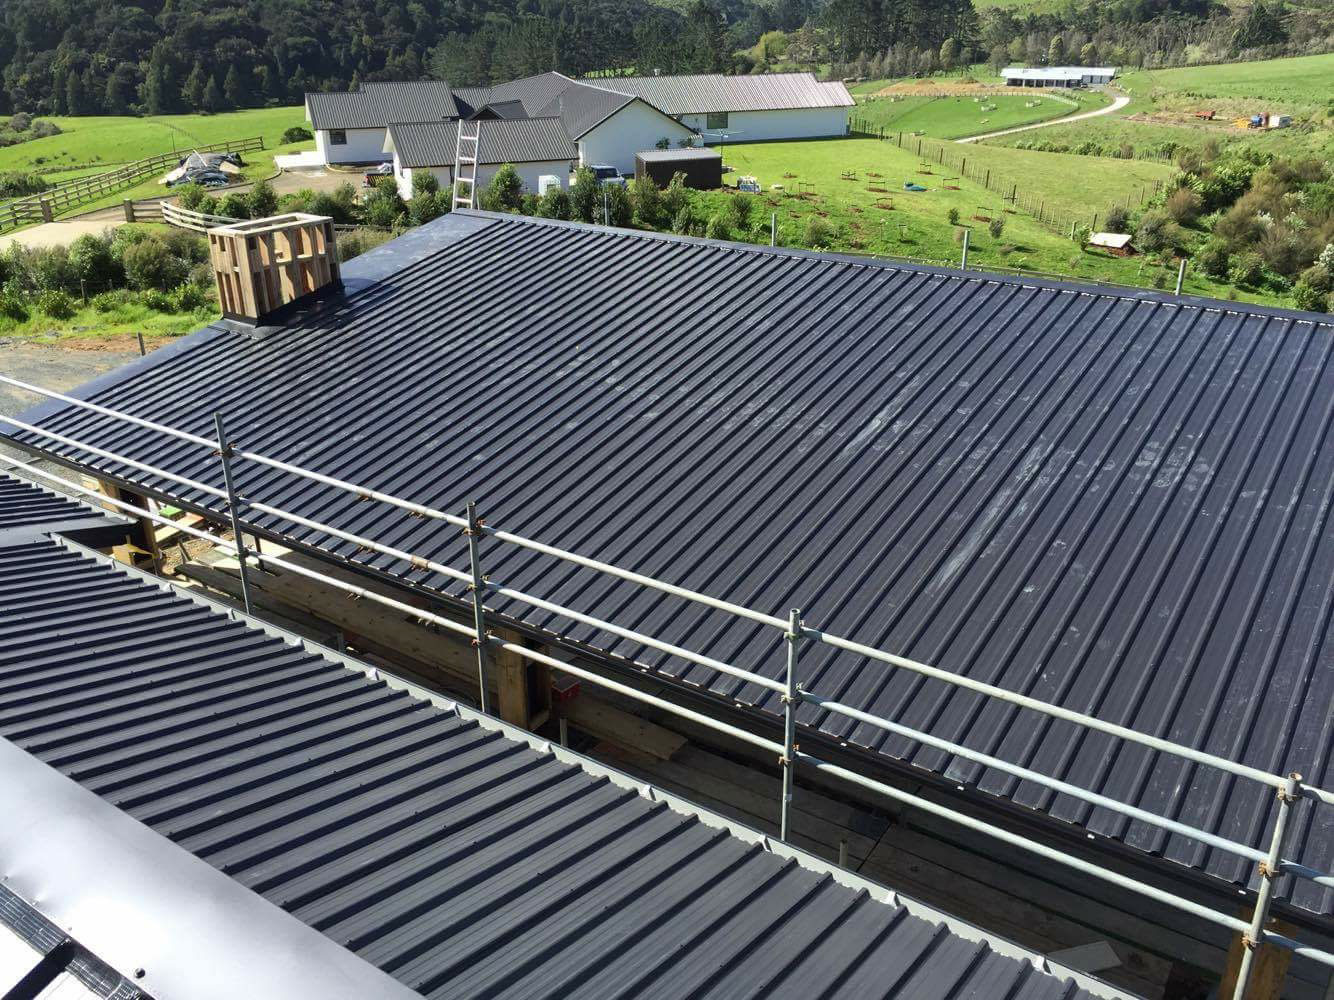 auckland roofing solutions services auckland and new zealand wide new roofs repair cladding and more Project gallery 73